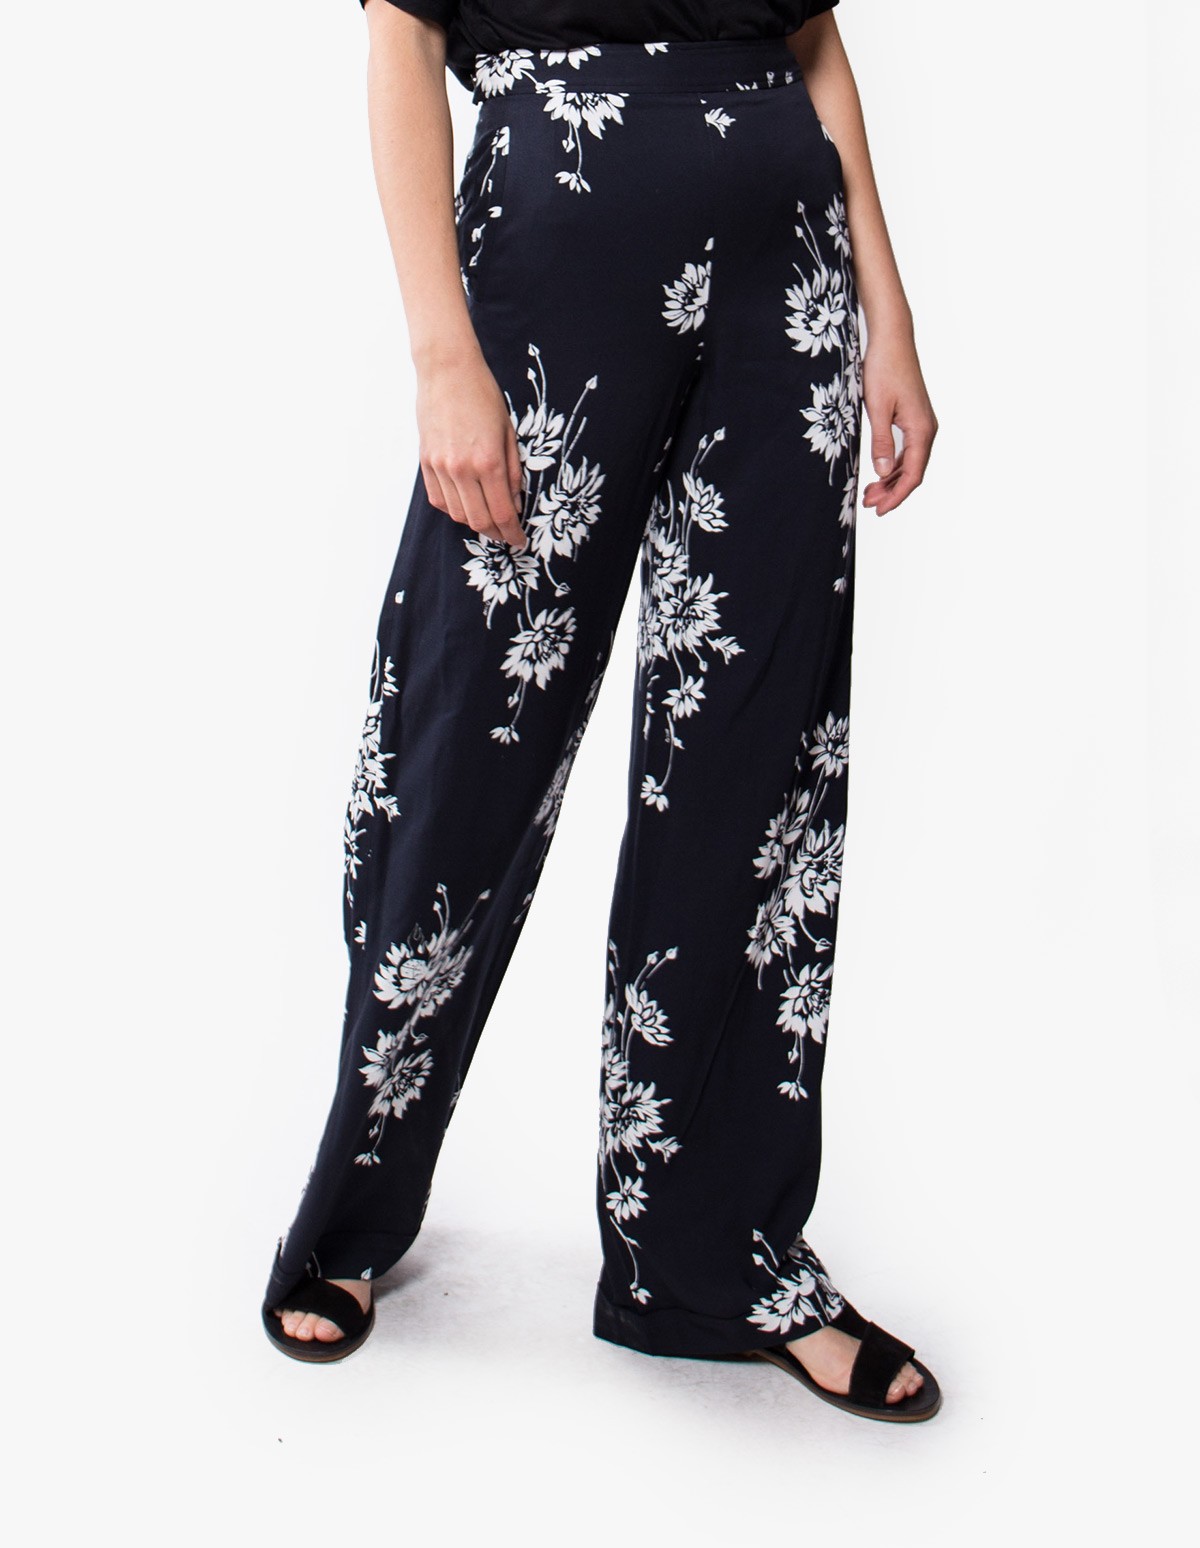 McQ Alexander McQueen Flaming Delilah Trousers  in Black